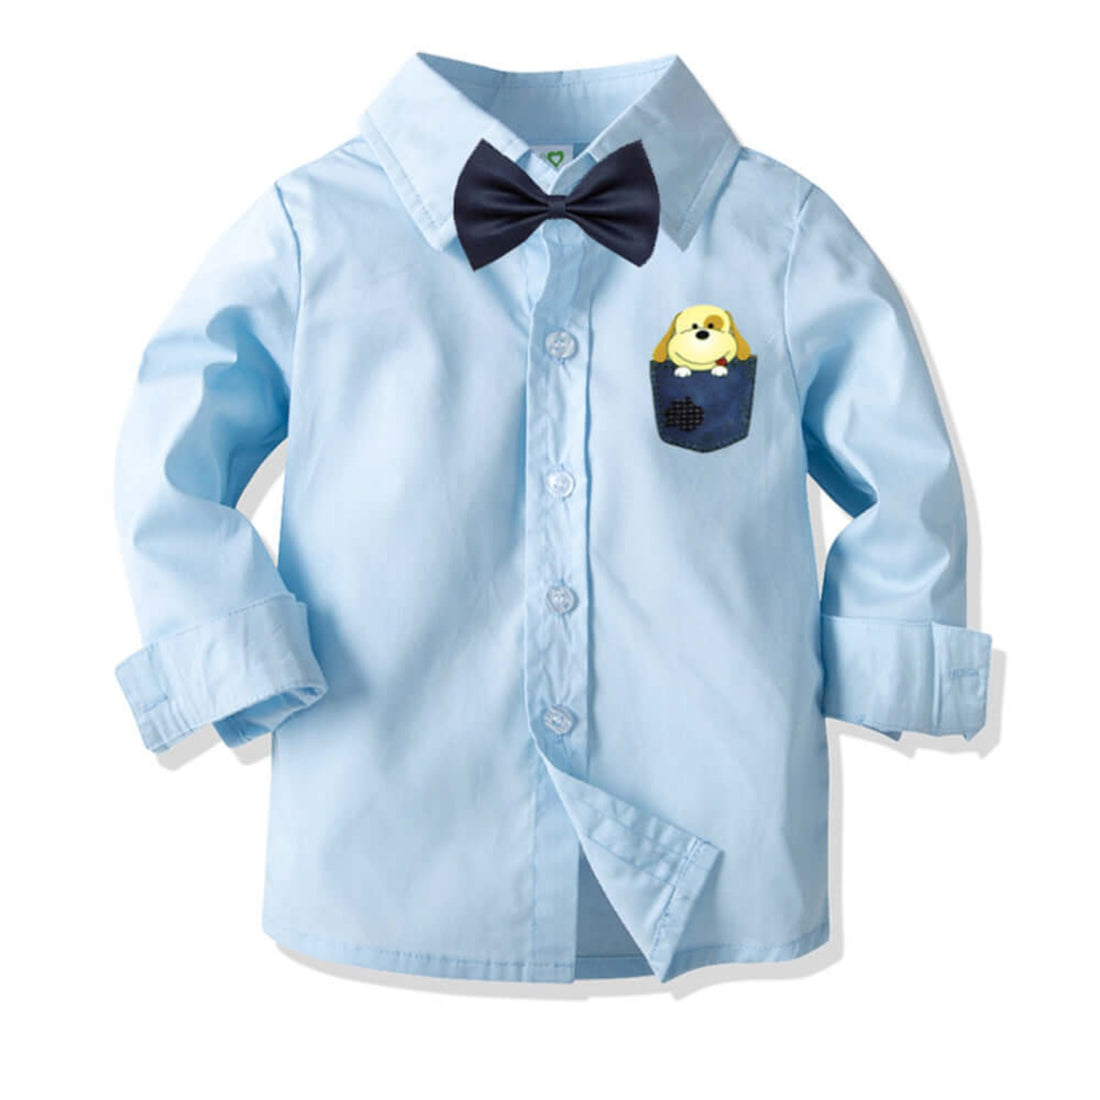 Baby Boy Clothing, Long Sleeve Shirt, Bottoming Shirt, Soft Cotton Shirt, Infant Clothing, Newborn Essentials, Baby Basics, Comfortable Baby Clothes, Snug Fit Baby, Shirt Baby Apparel